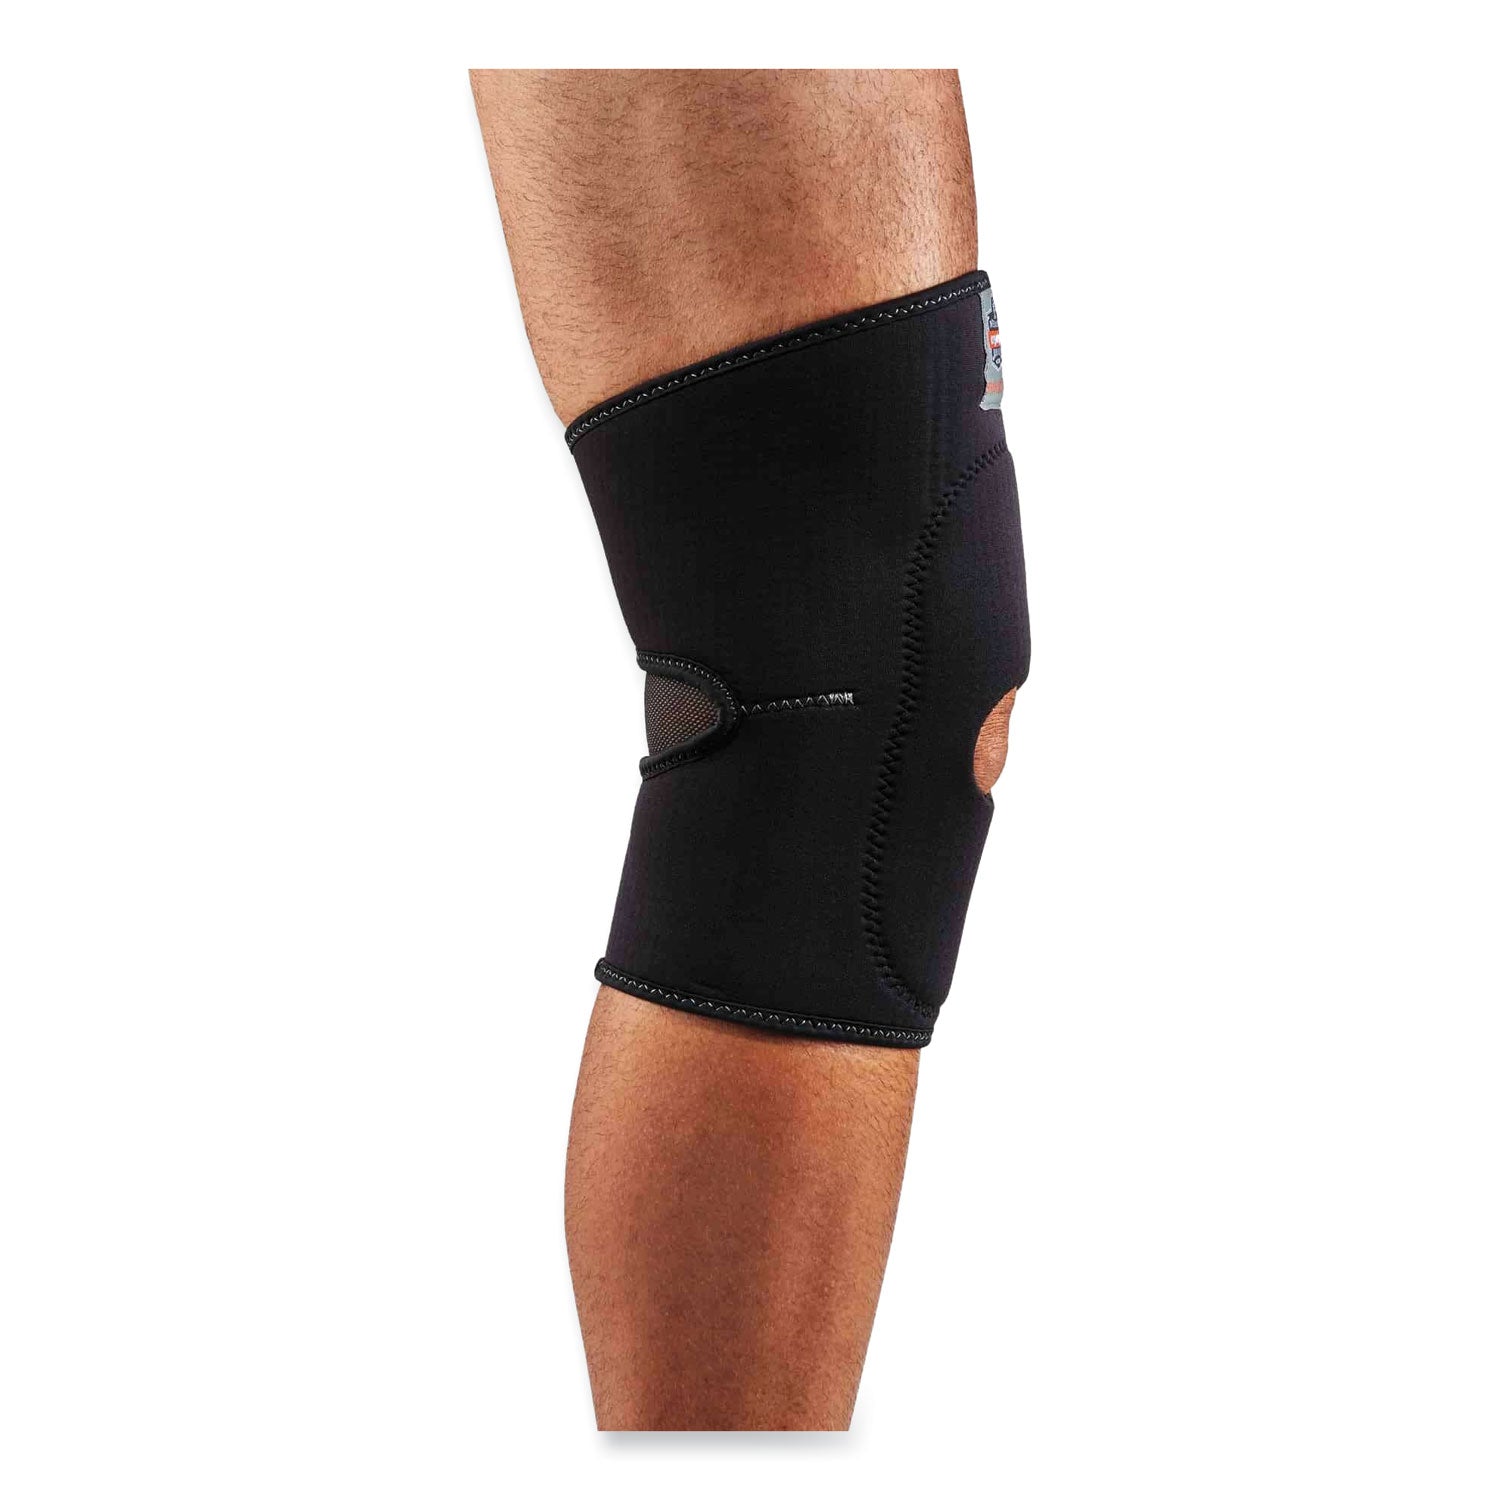 proflex-615-open-patella-anterior-pad-knee-sleeve-2x-large-black-ships-in-1-3-business-days_ego16536 - 2